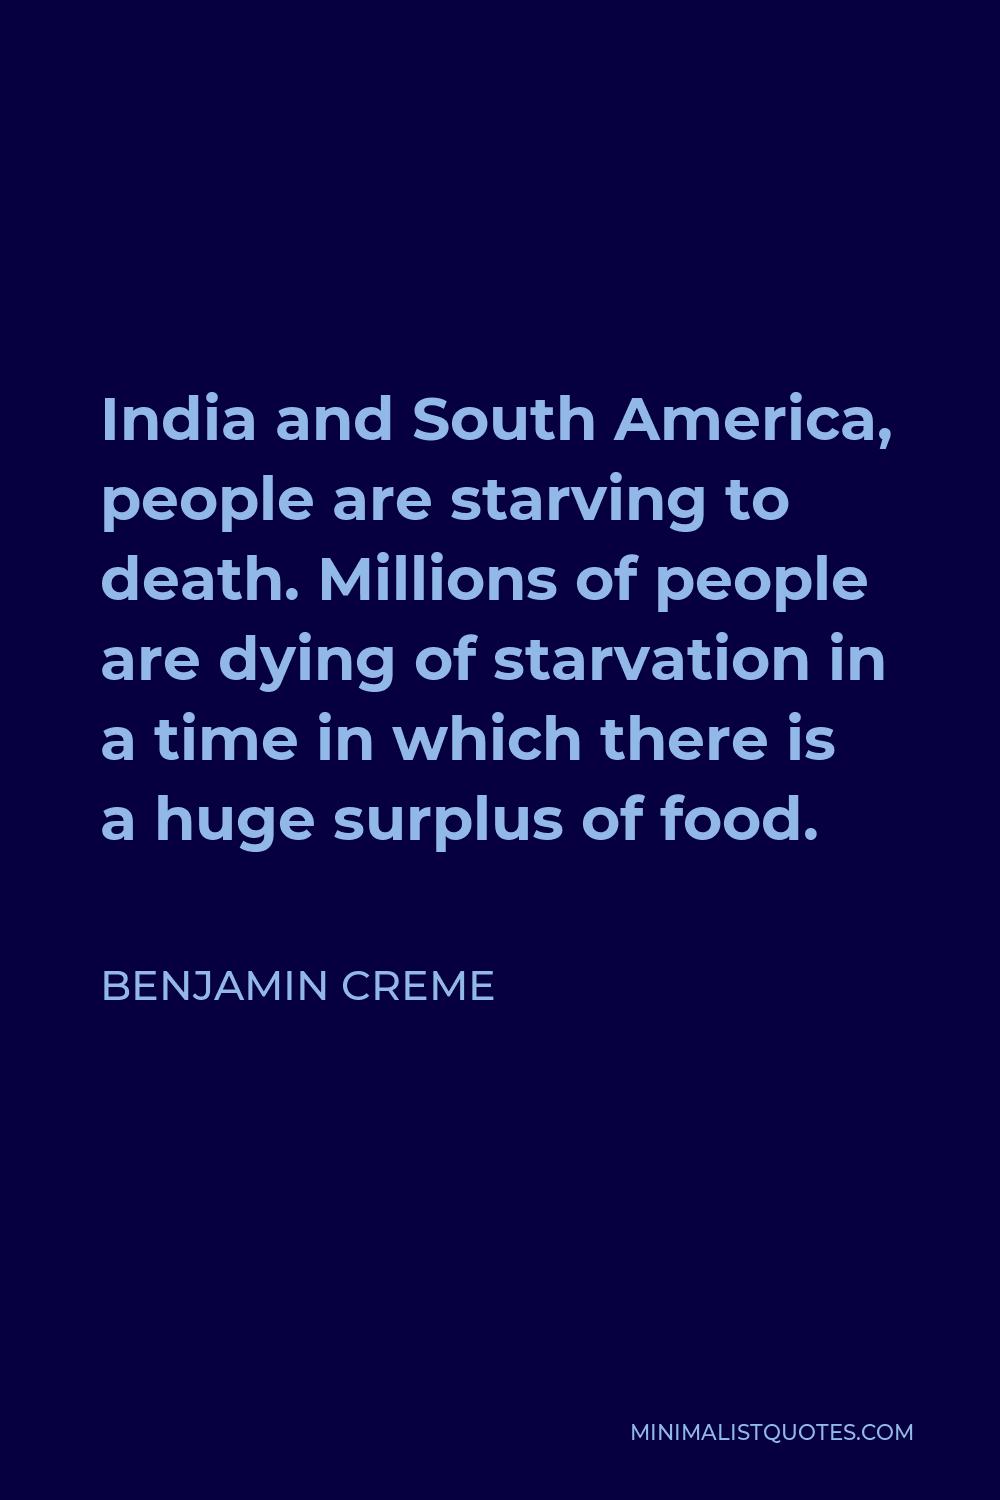 Benjamin Creme Quote - India and South America, people are starving to death. Millions of people are dying of starvation in a time in which there is a huge surplus of food.